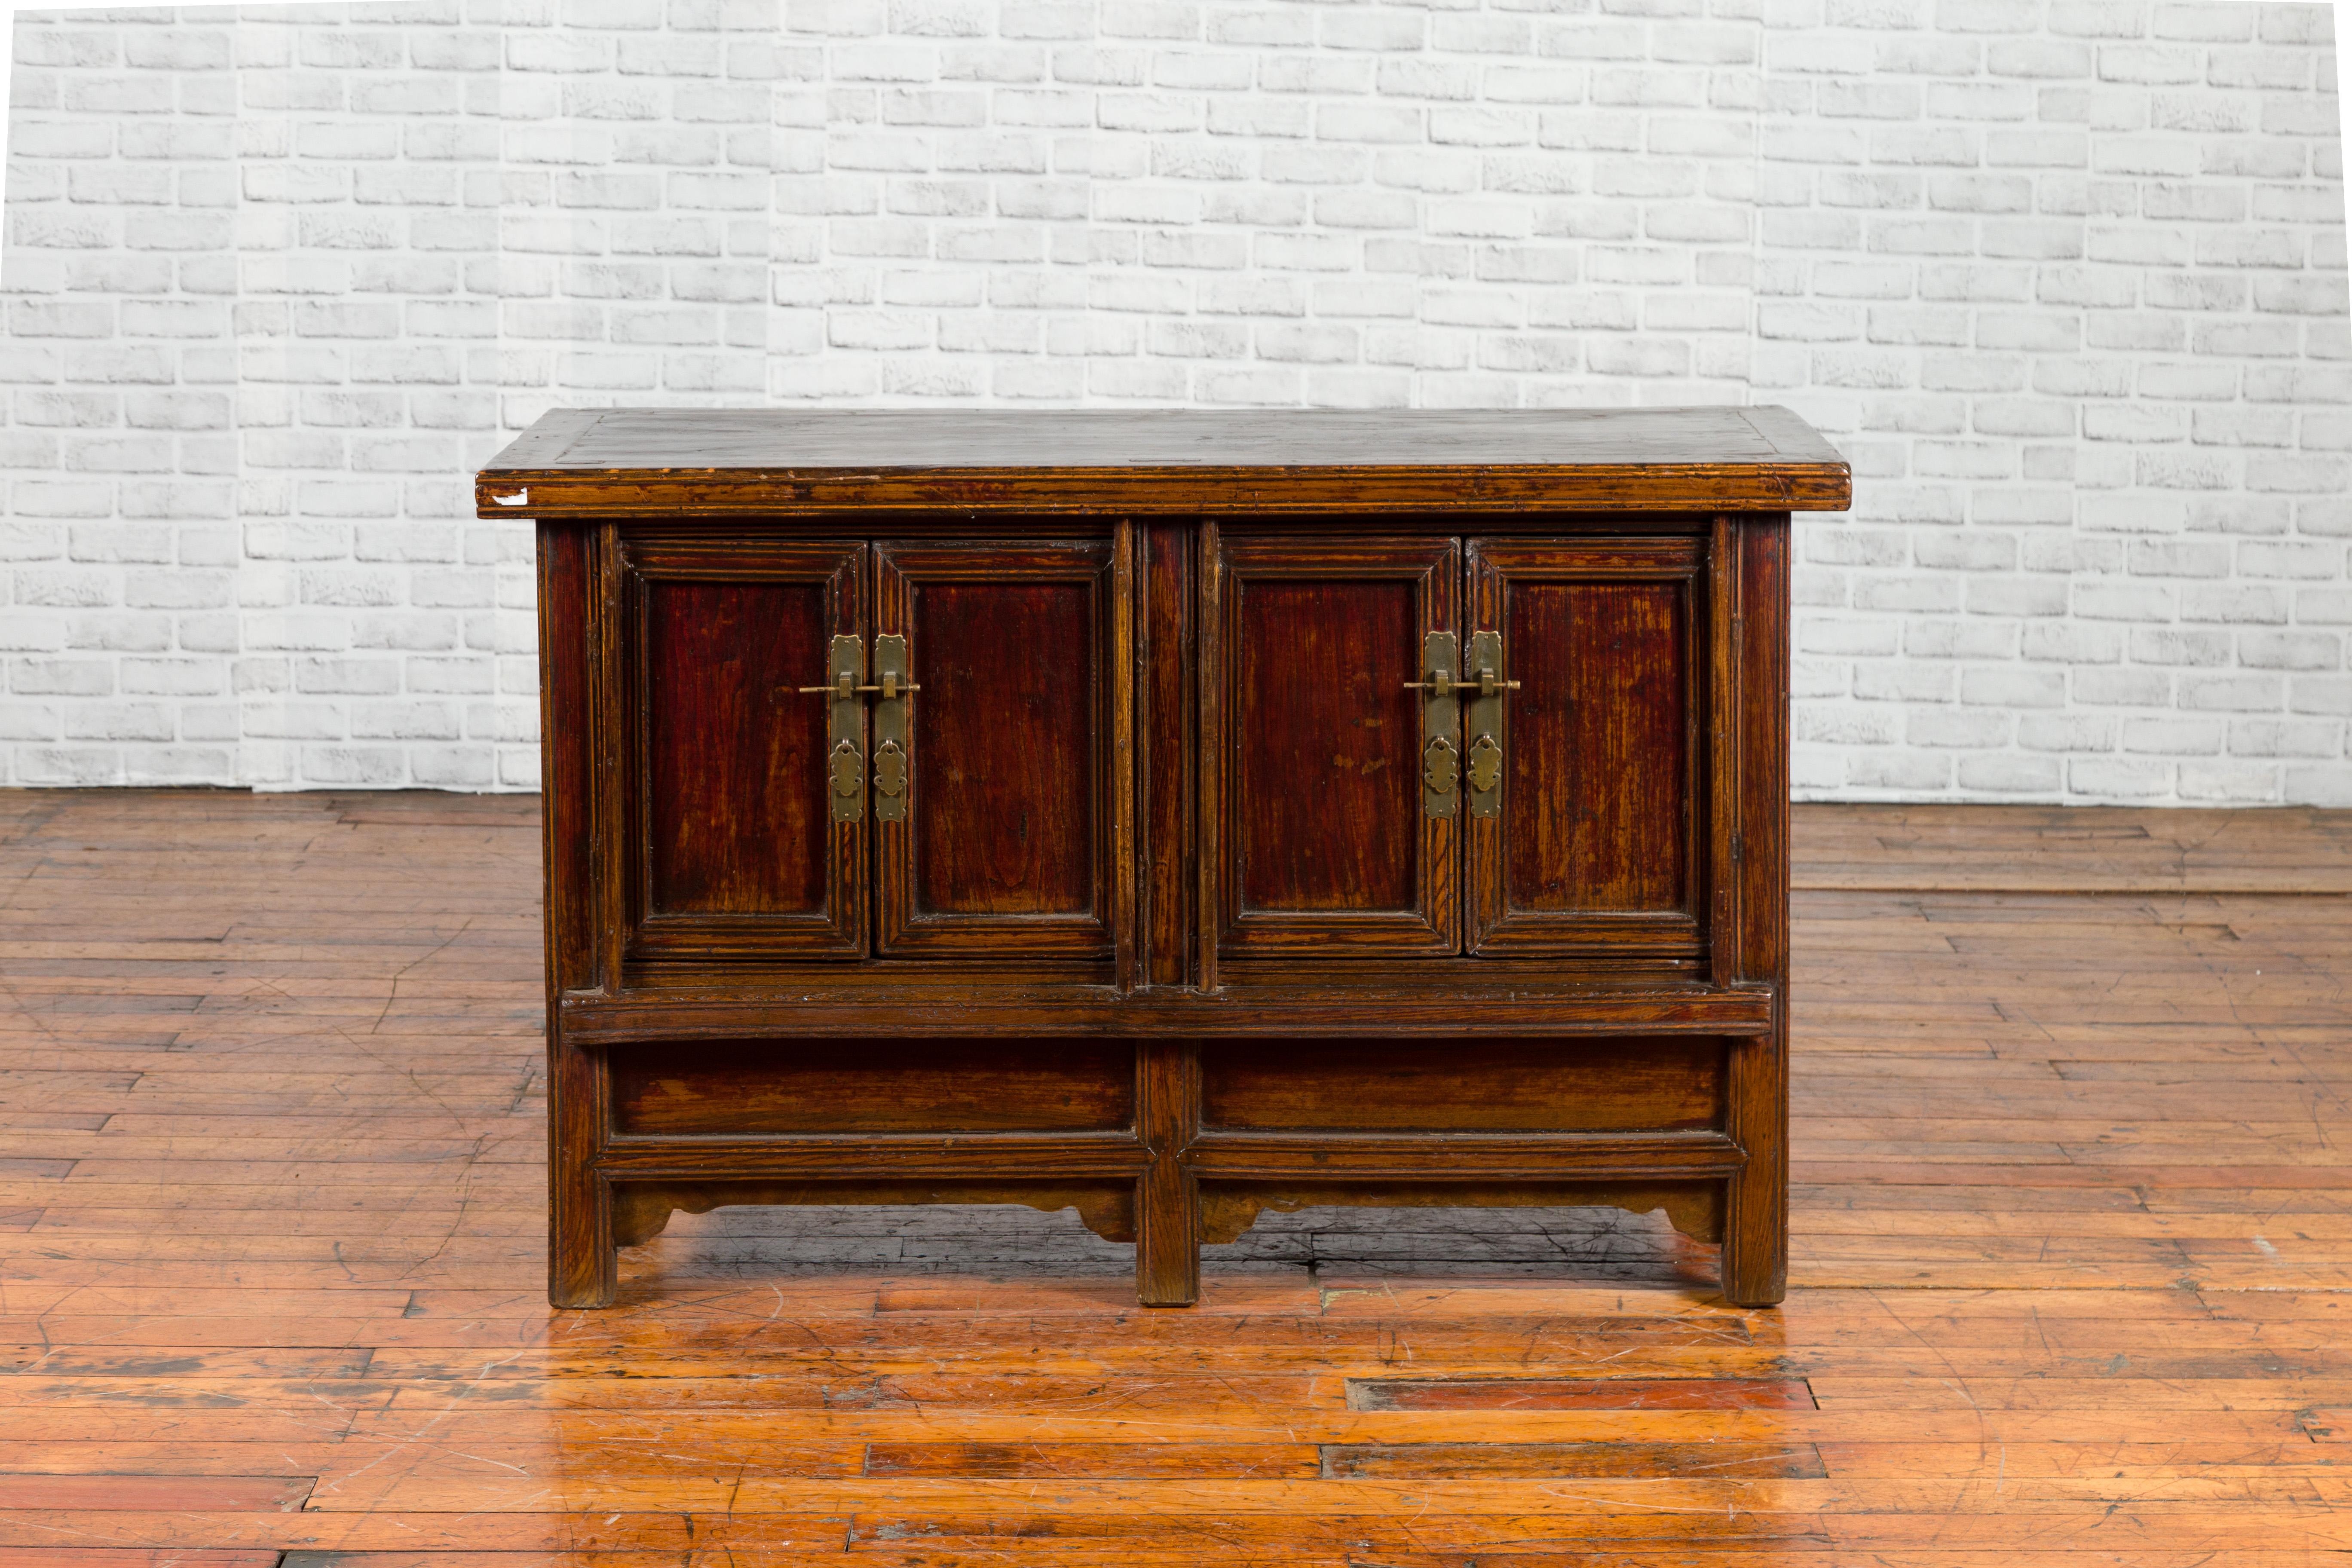 A Chinese Qing Dynasty period side cabinet from the 19th century, with brown lacquer and two pairs of double doors. Created in China during the Qing Dynasty period, this side cabinet features a rectangular top with central board and distressed